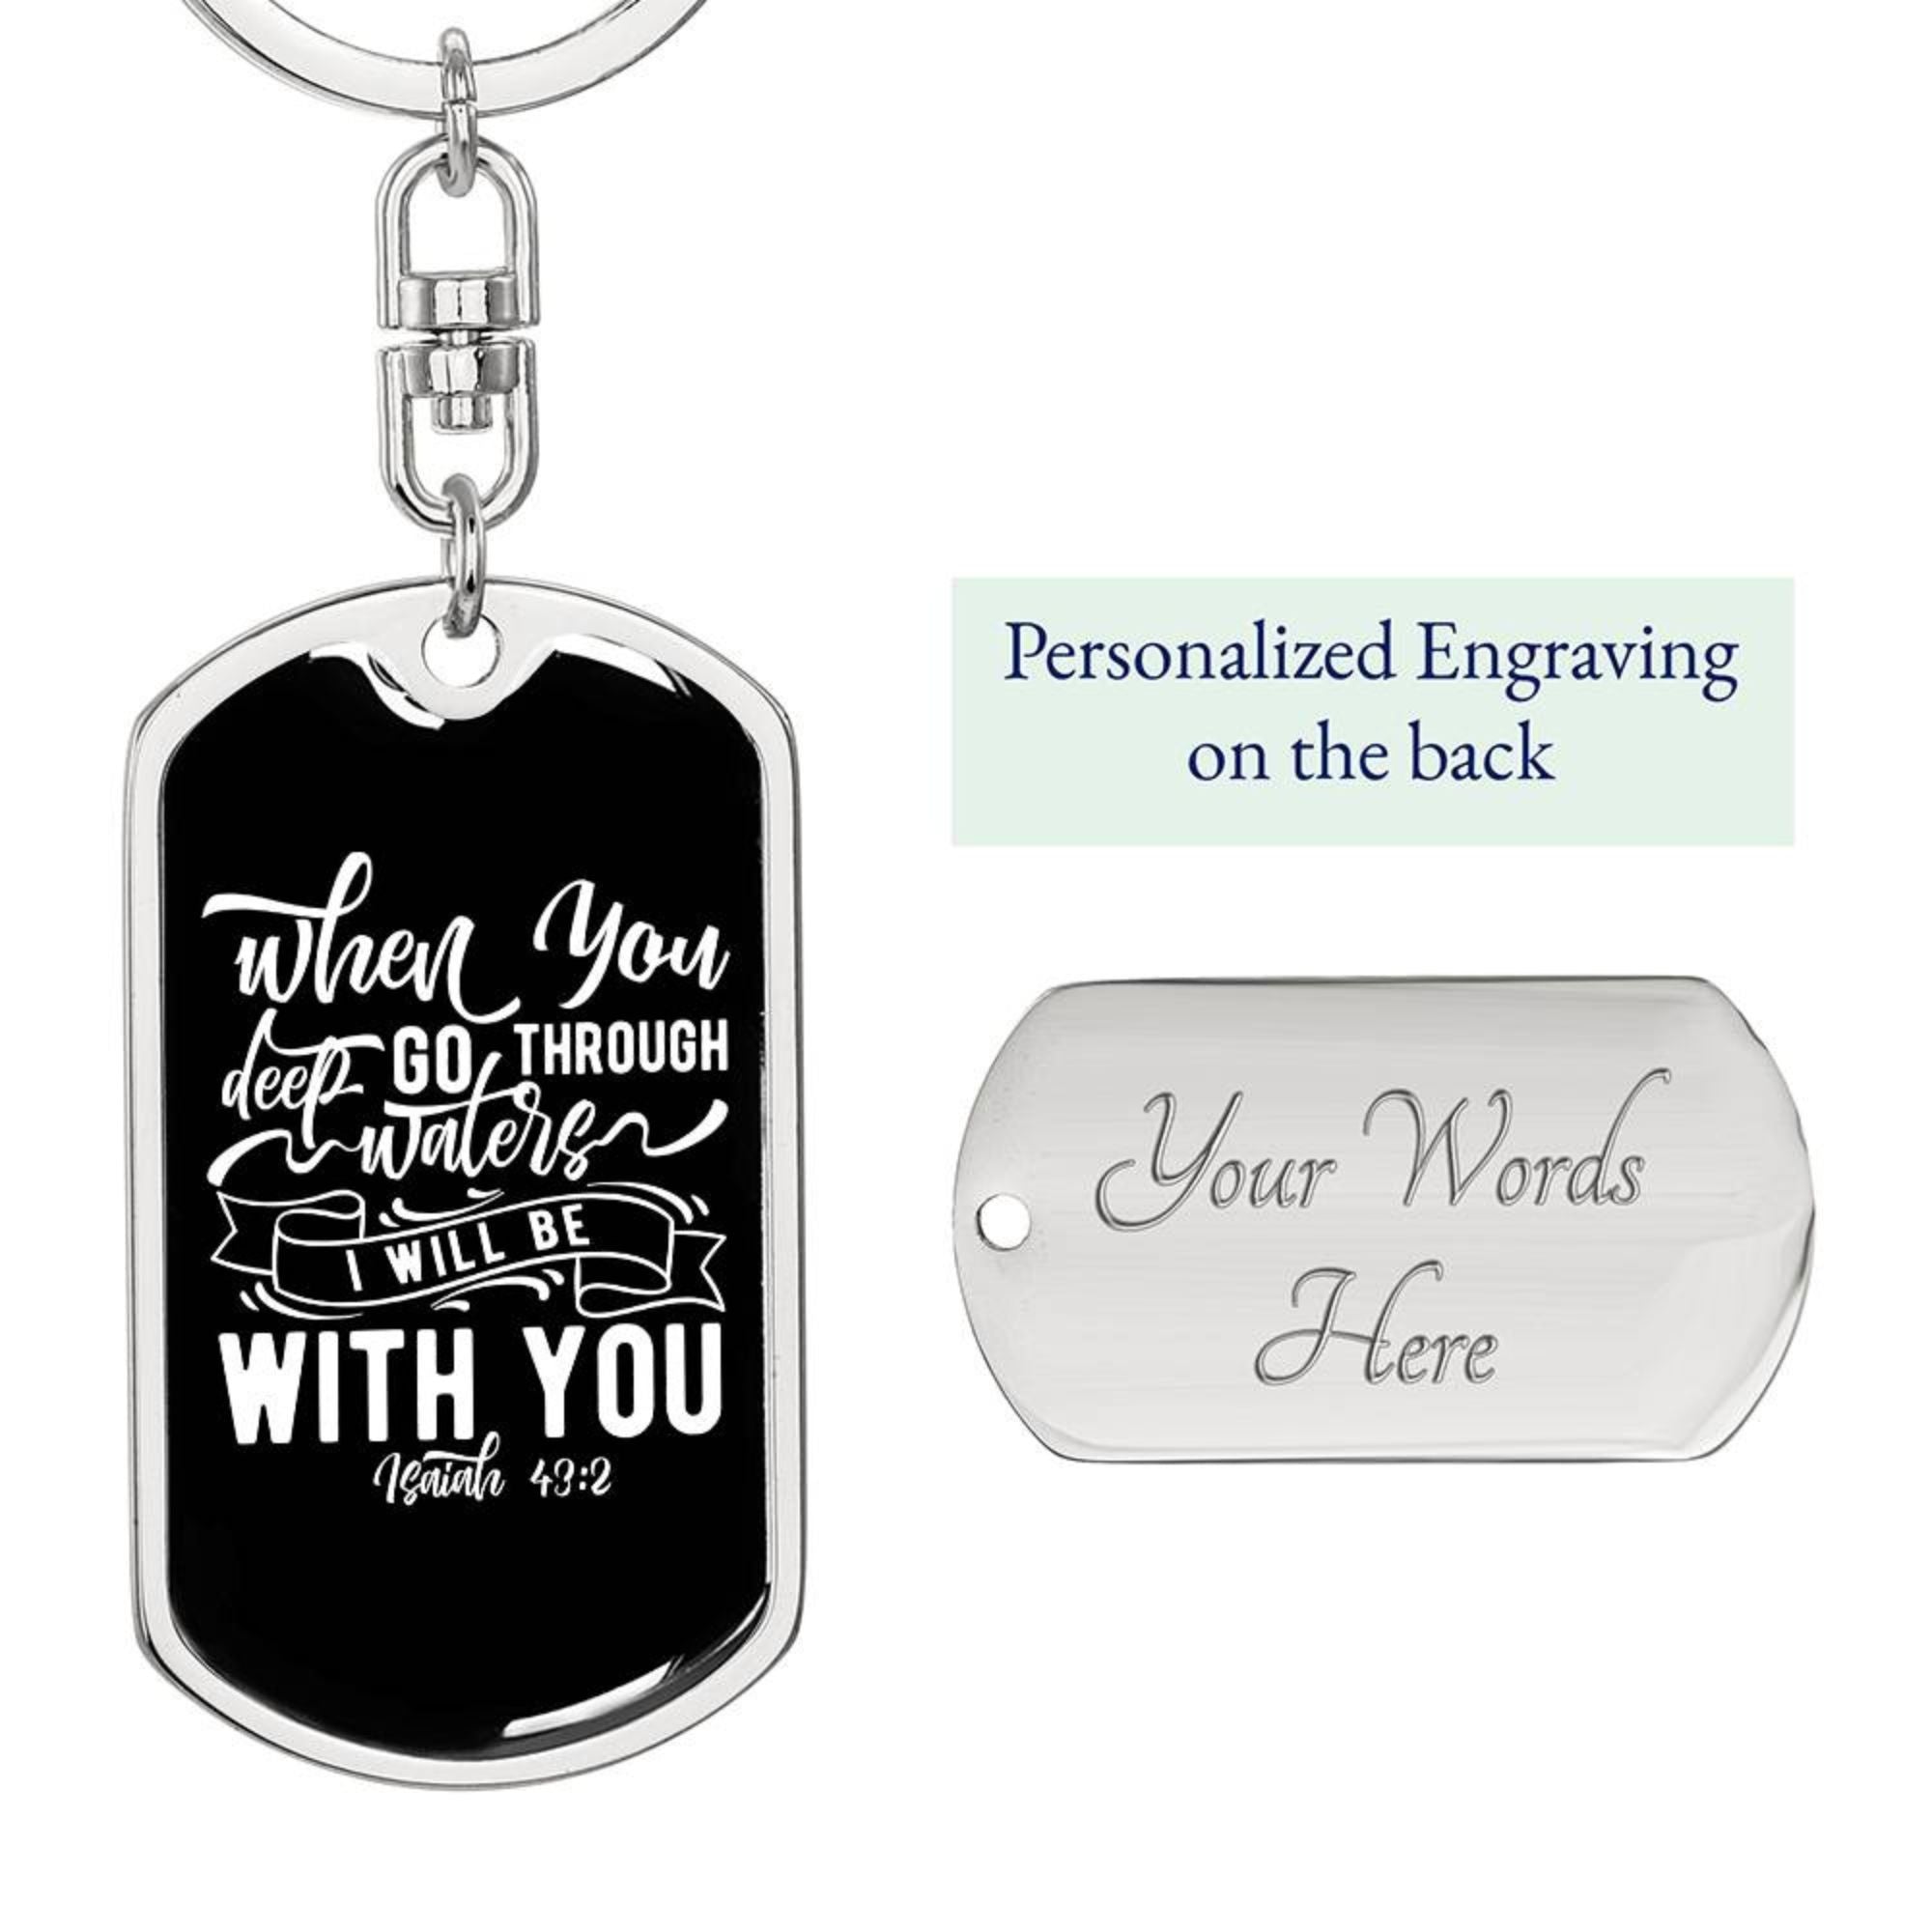 I Will Be With You - White Dog Tag with Swivel Keychain Engraving: Yes Jesus Passion Apparel